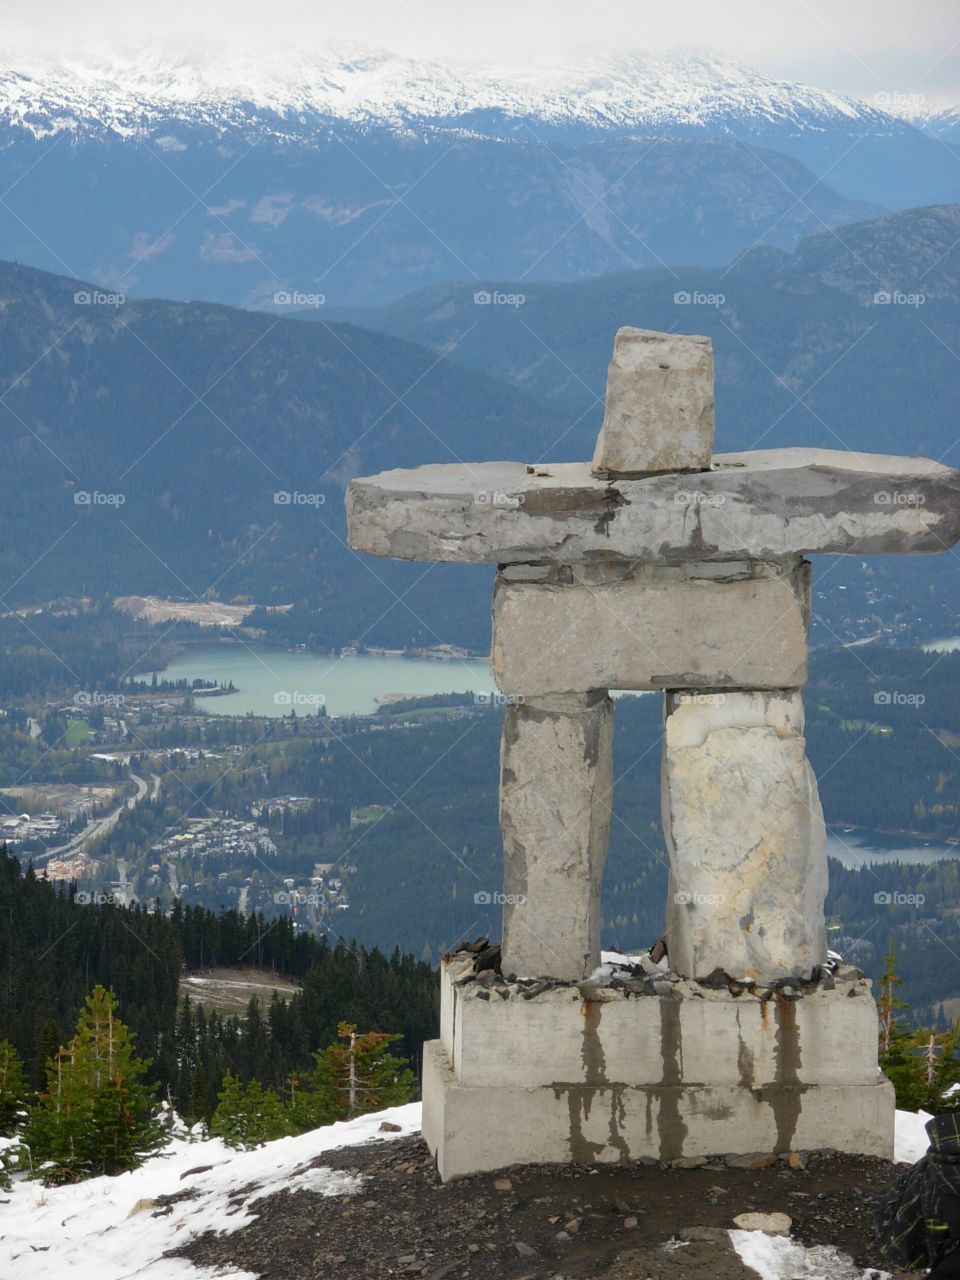 The Inukshuk greets visitors to Whistler.